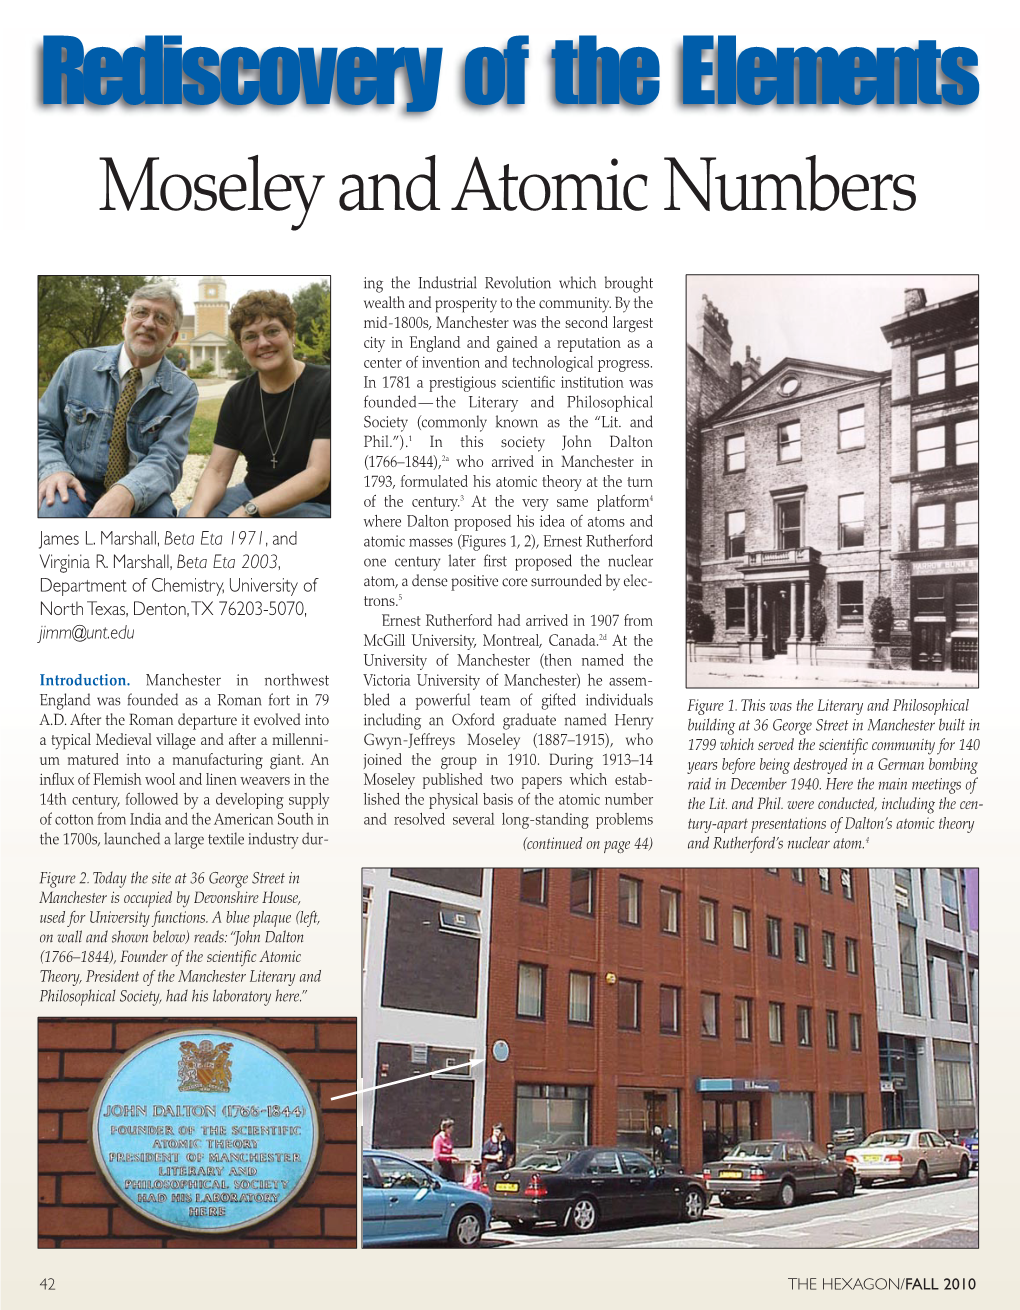 Moseley and Atomic Numbers